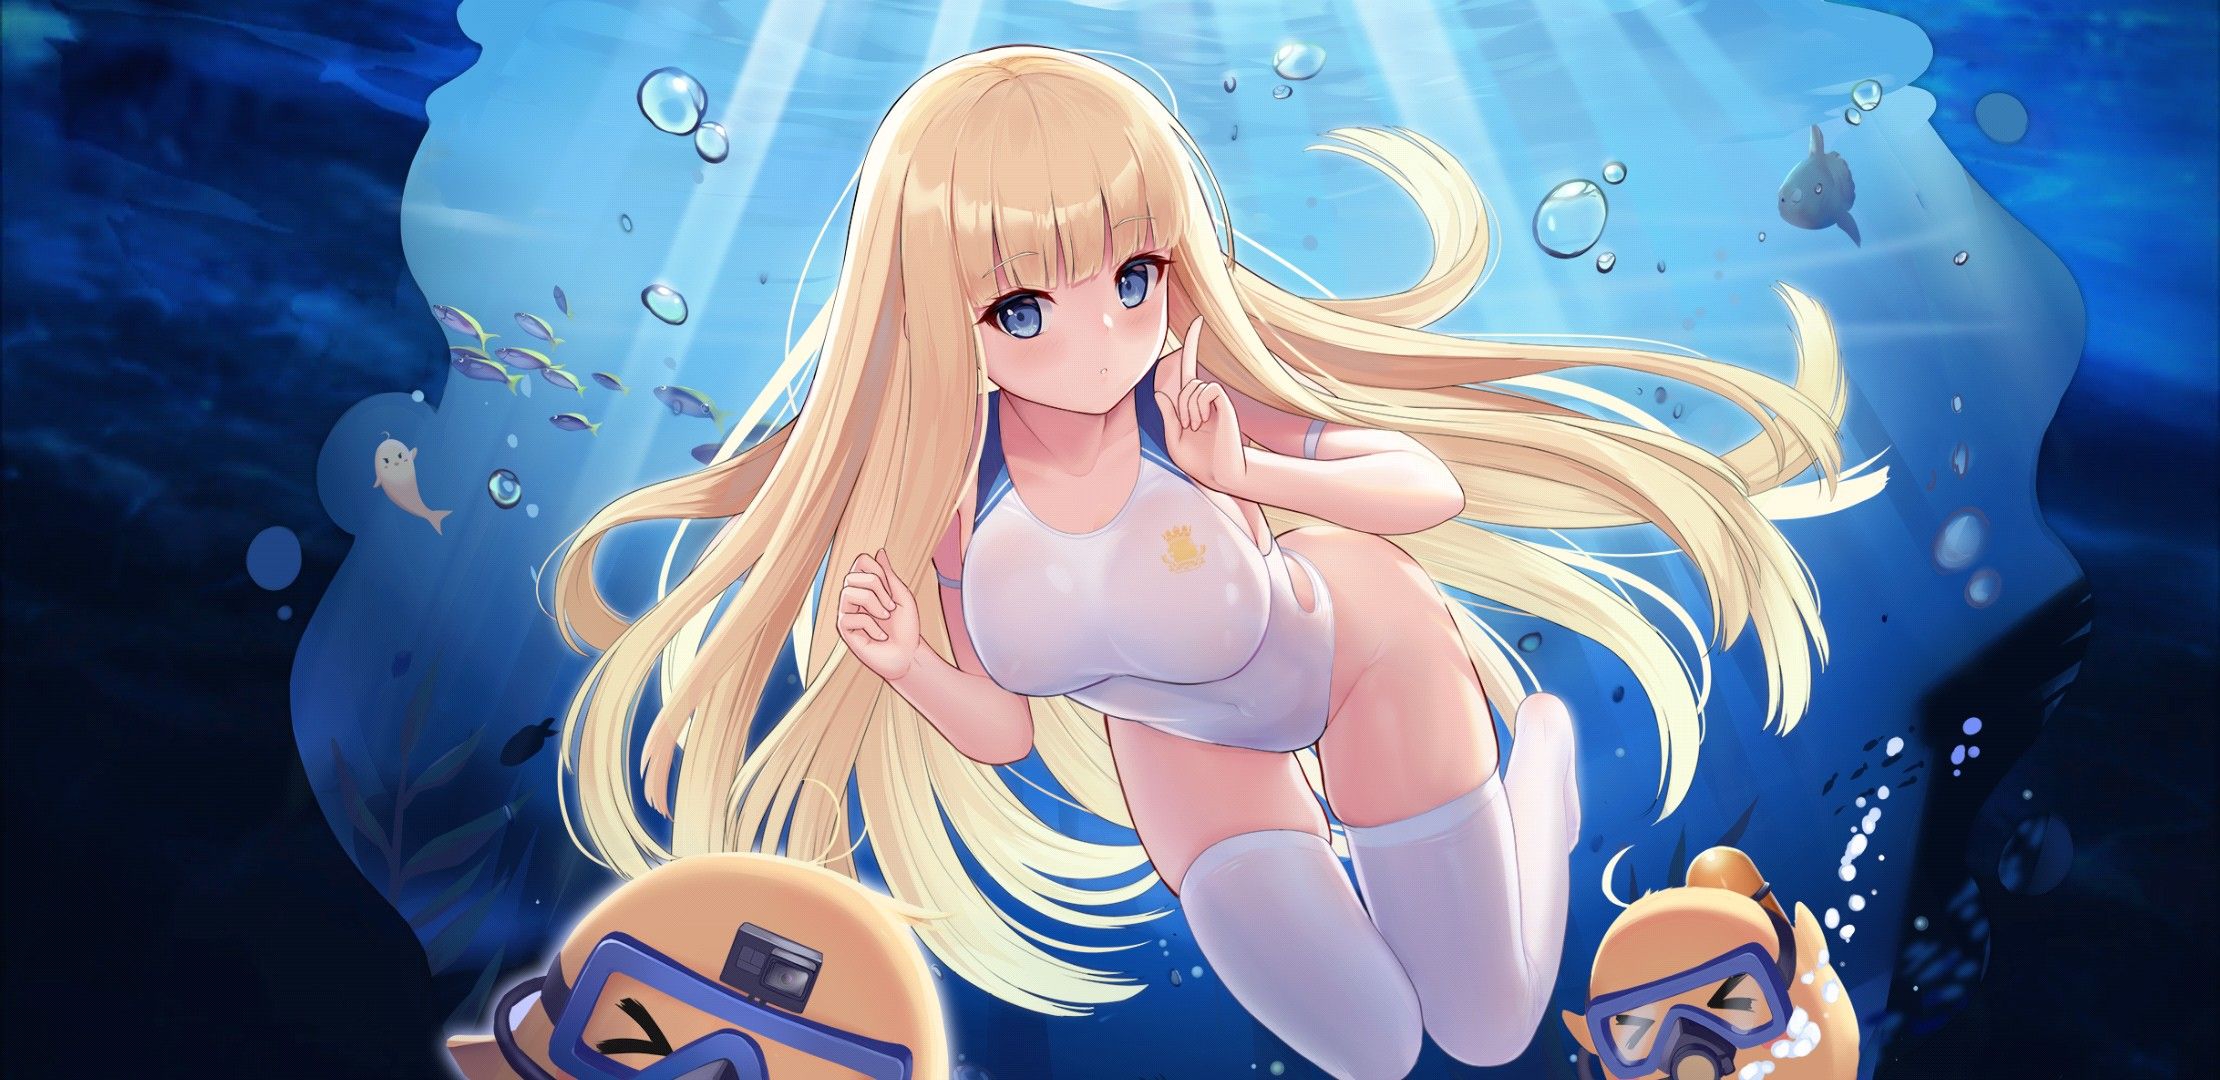 【There is an image】 Smartphone that urges charging with erotic swimsuits is malicious 6